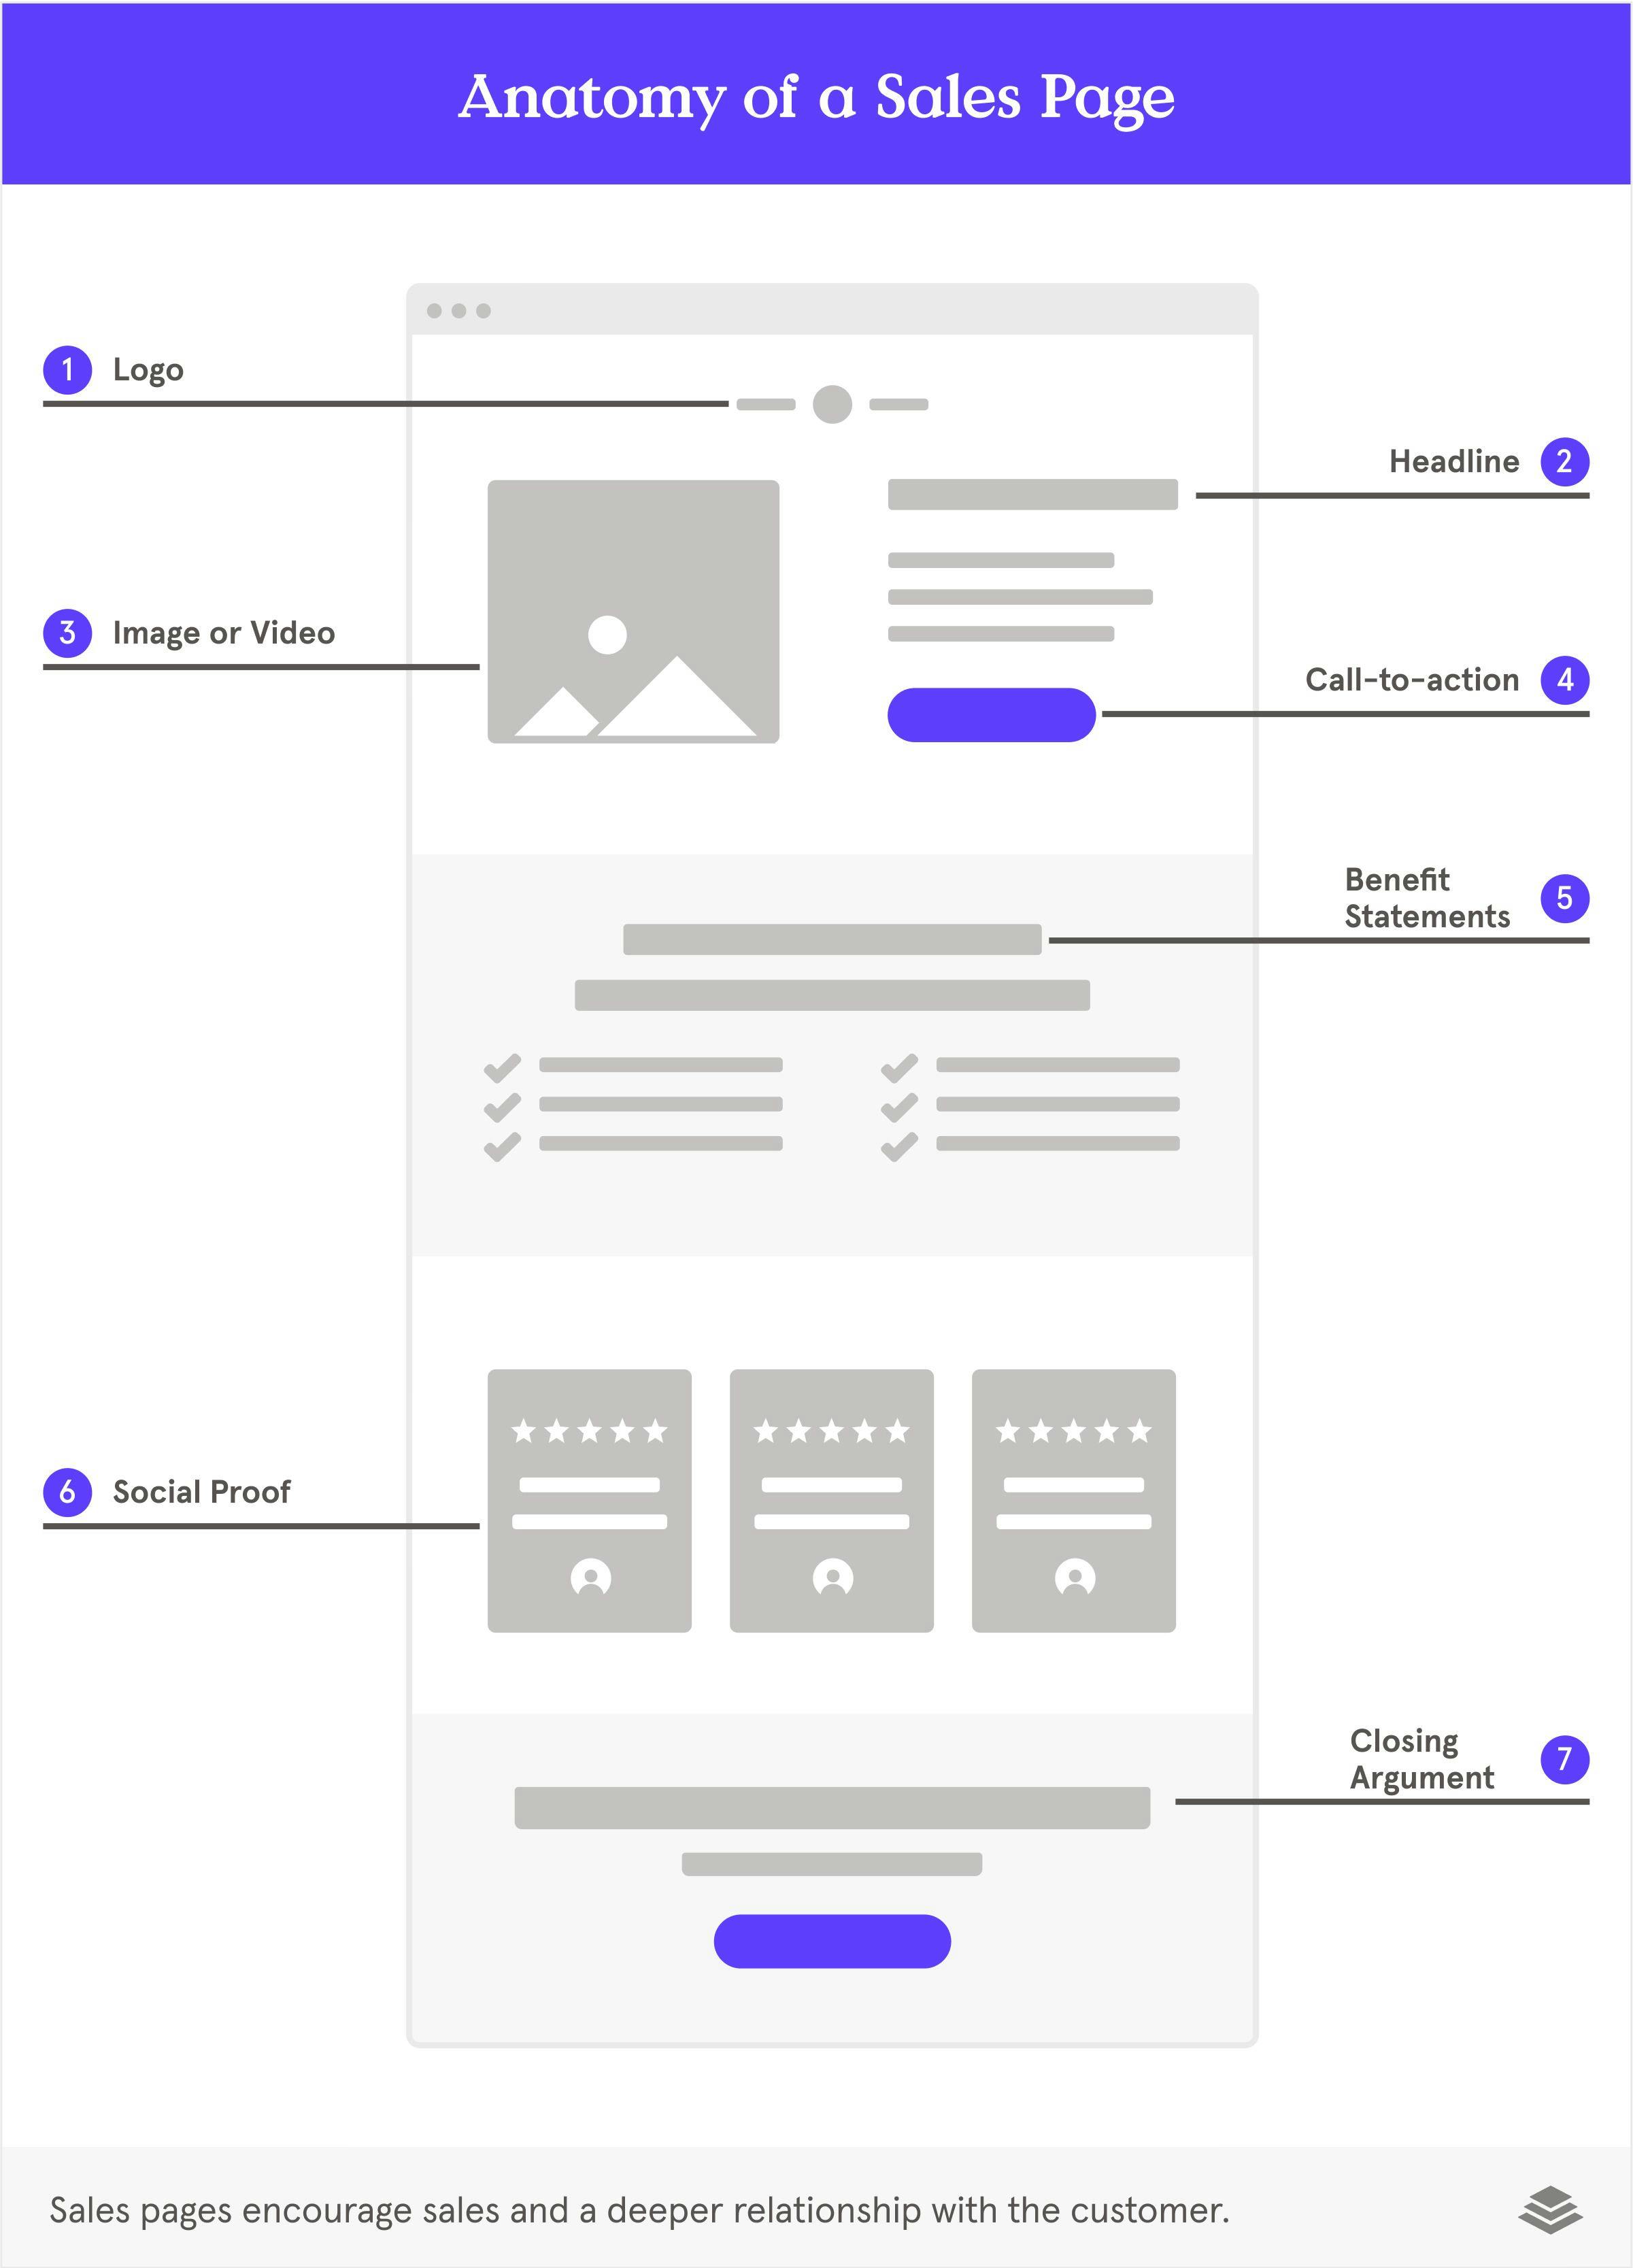 Anatomy of a sales page